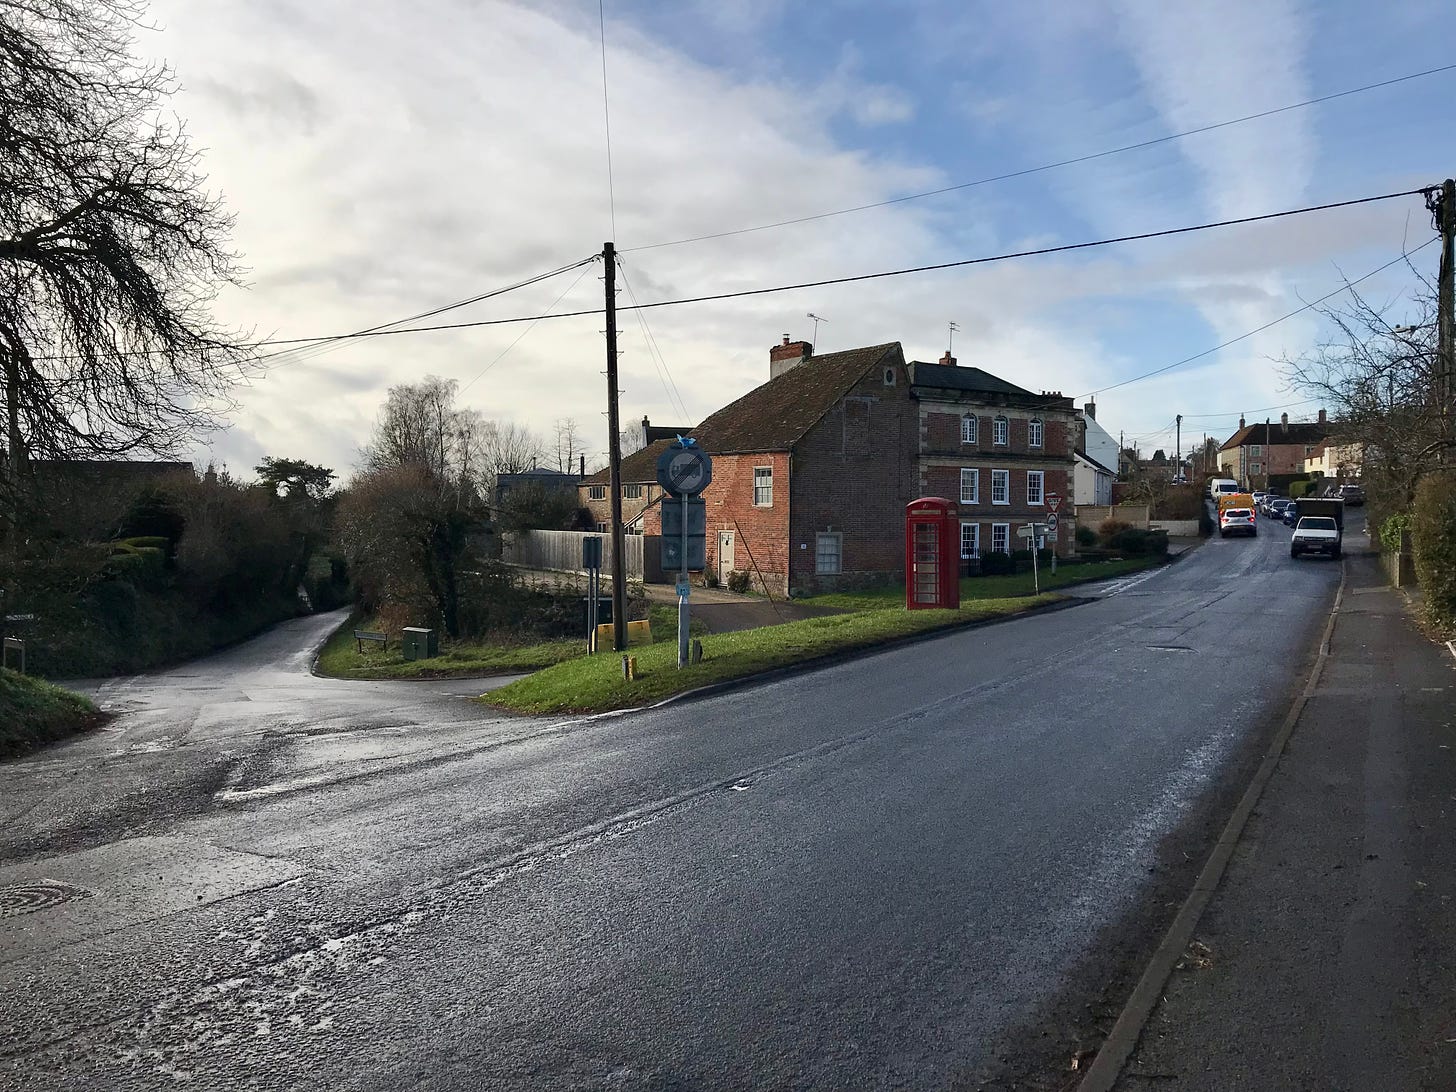 The Wiltshire village of Chapmanslade. A telephone box stands on the tiny green.